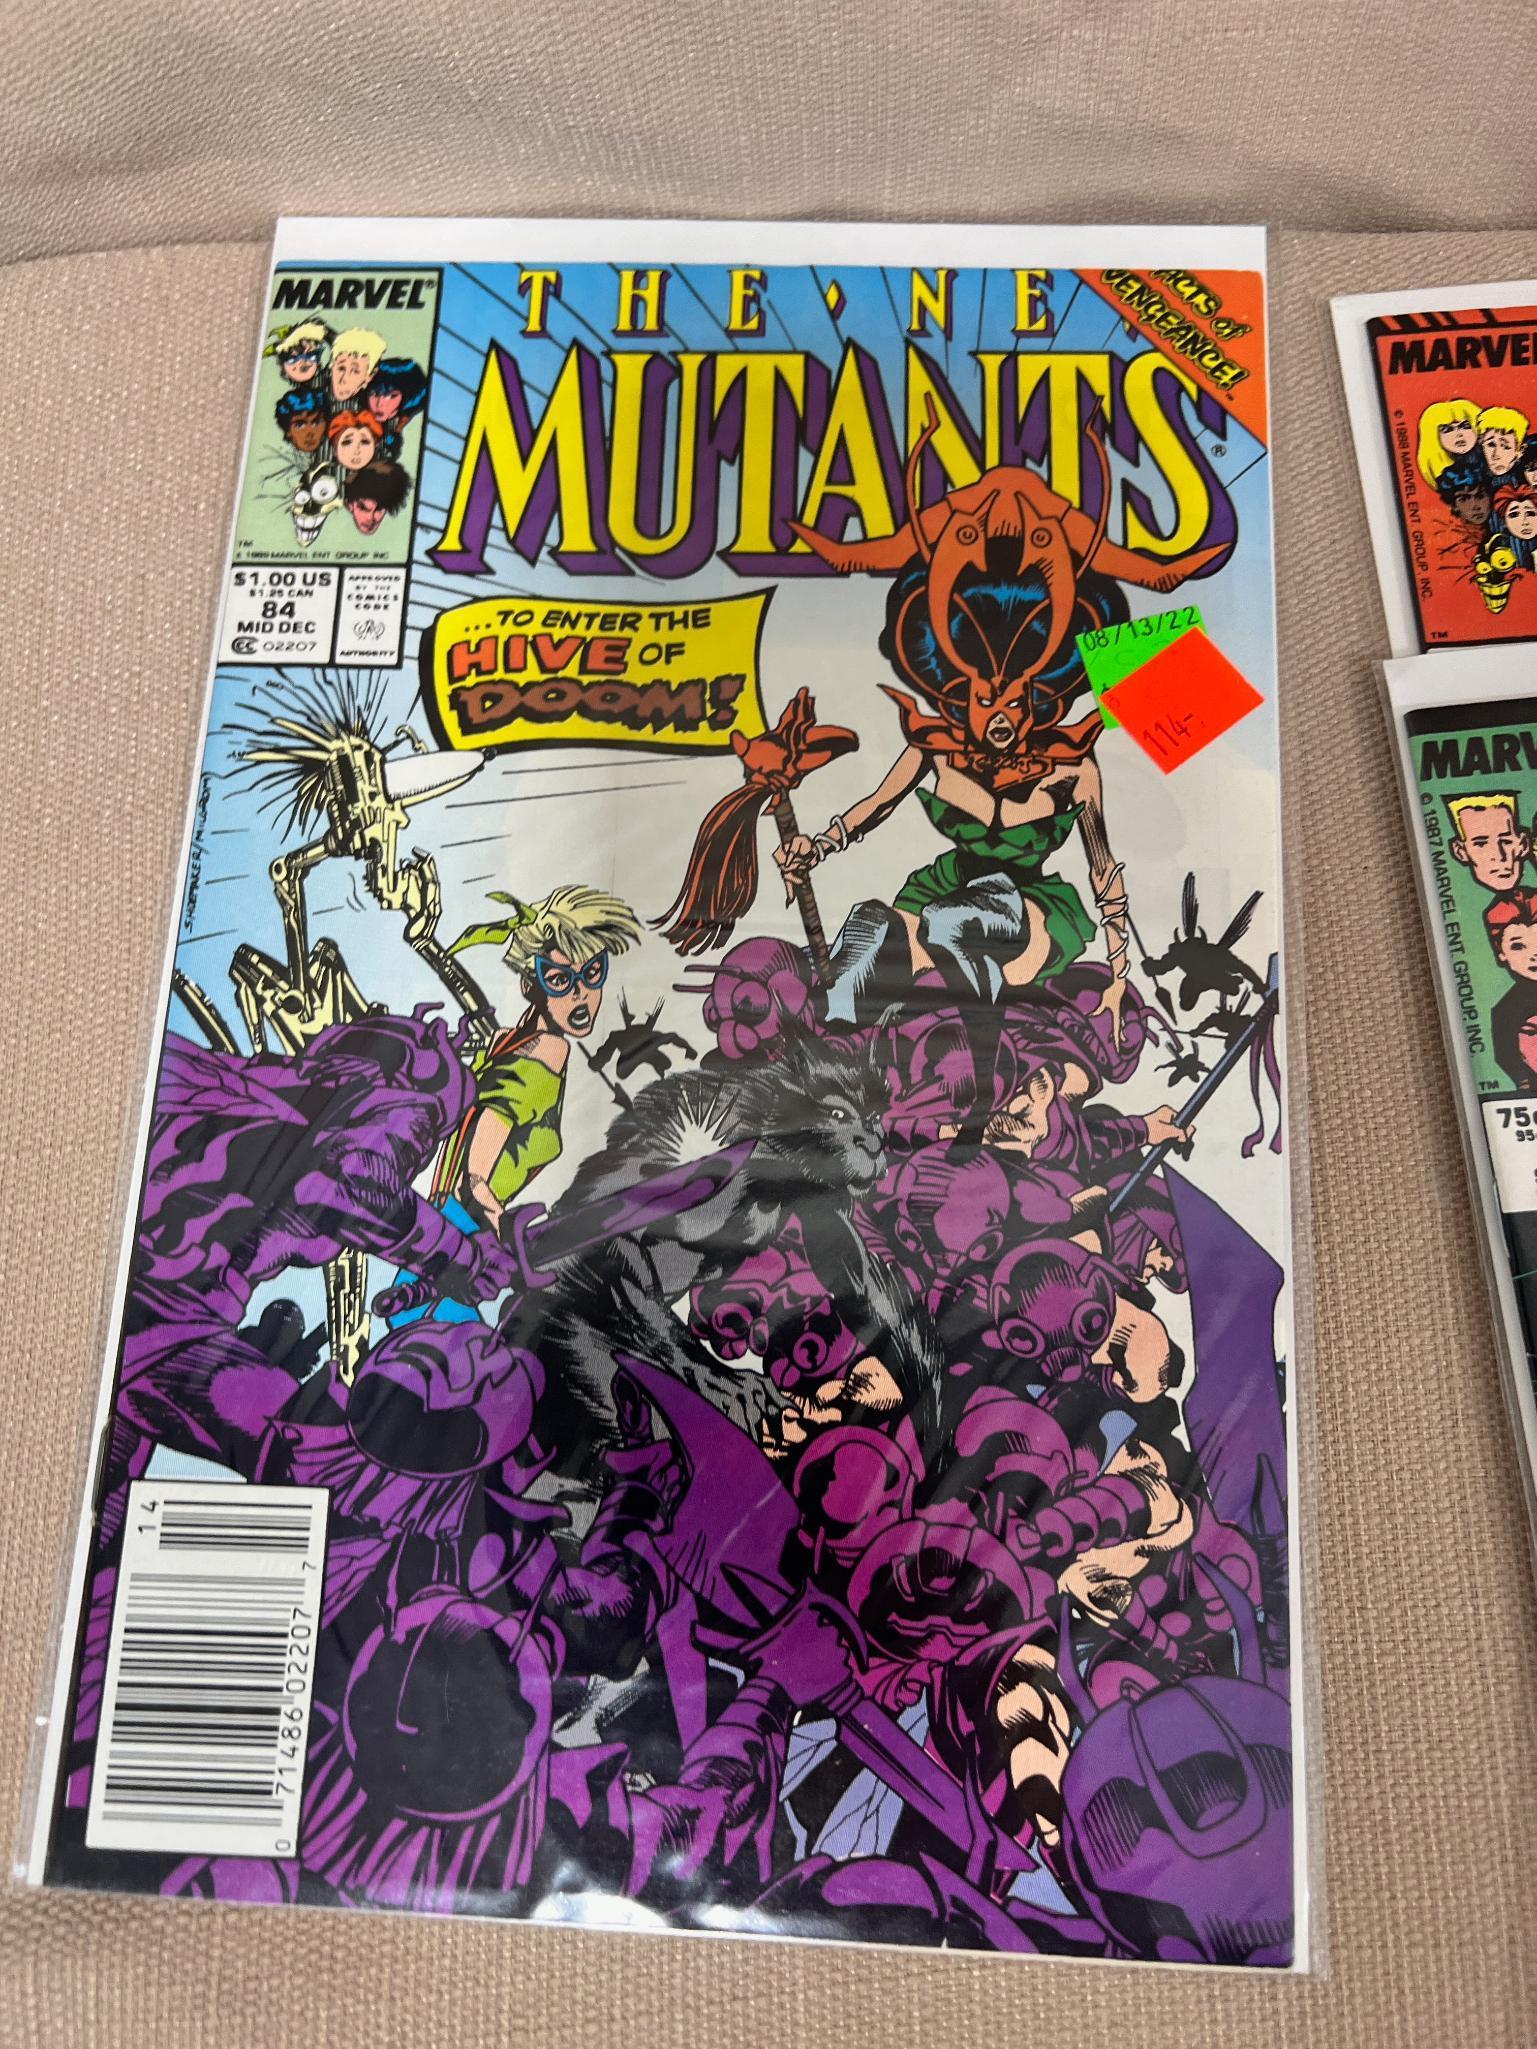 24- The New Mutants including no. 2 & 100 and other early Issues, 1st Cable, and Shatterstar